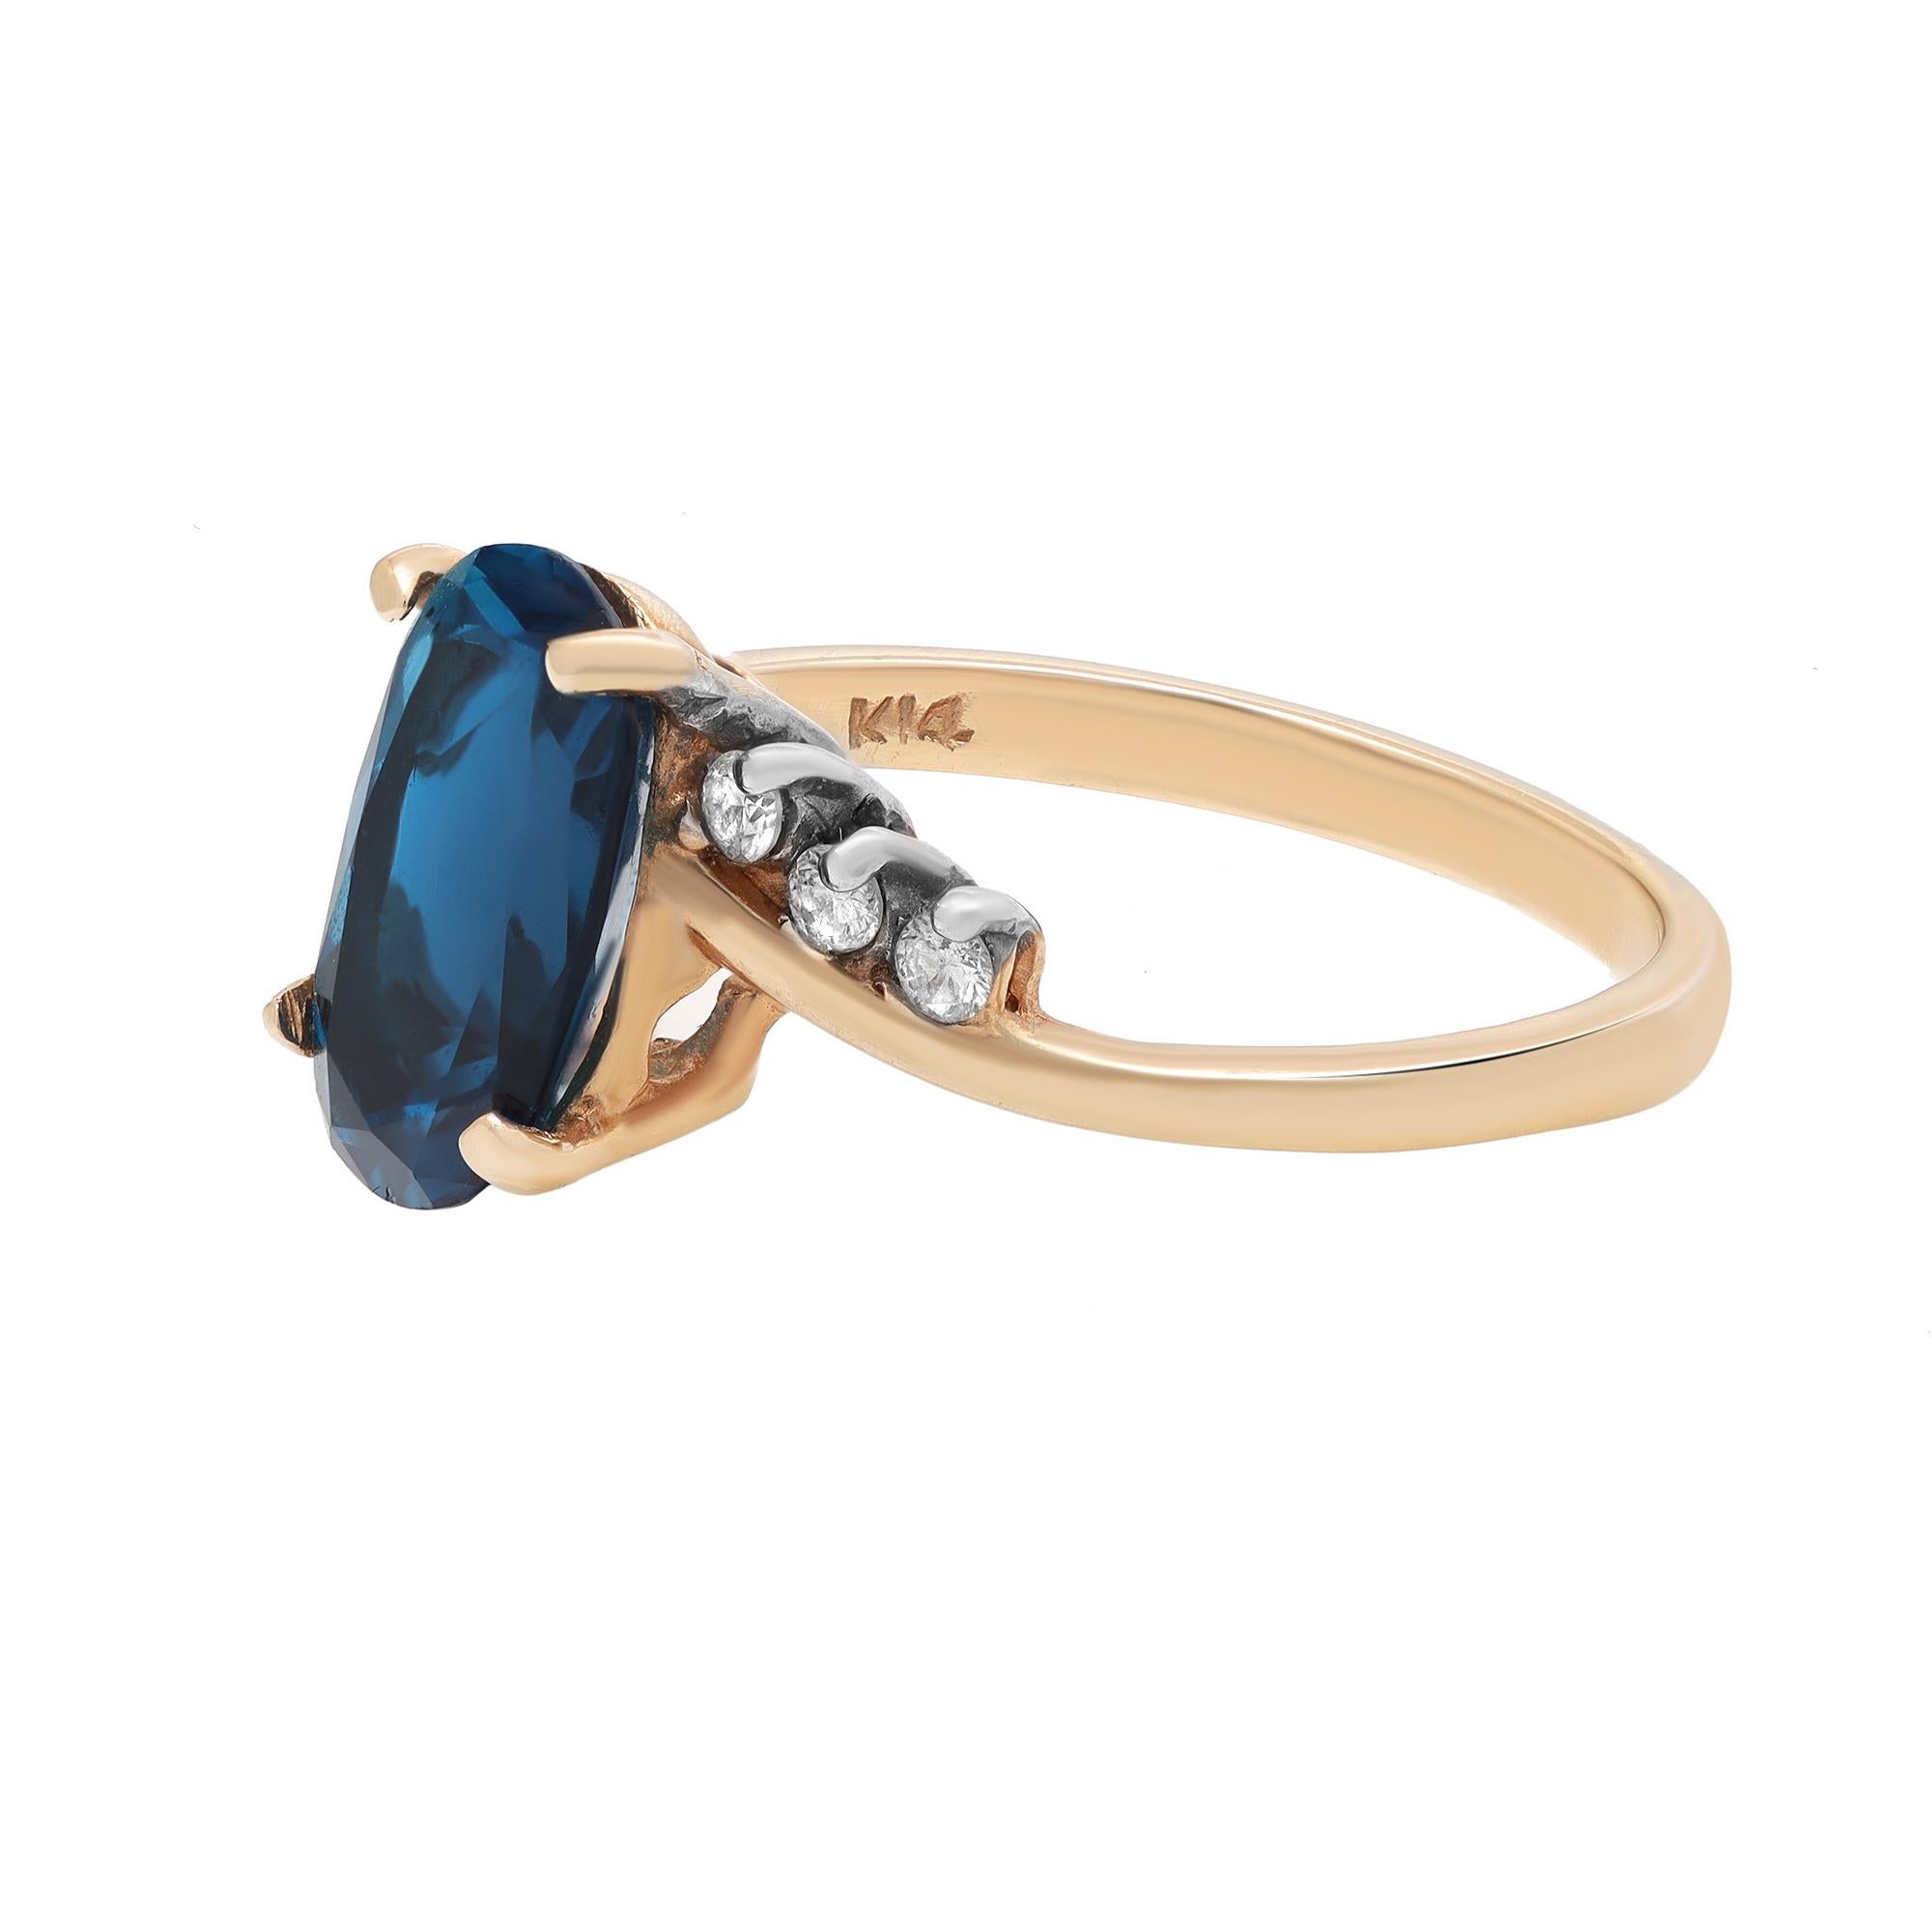 Modern London Blue Topaz And Diamond Ladies Ring 14k Yellow Gold 1.73Cttw For Sale